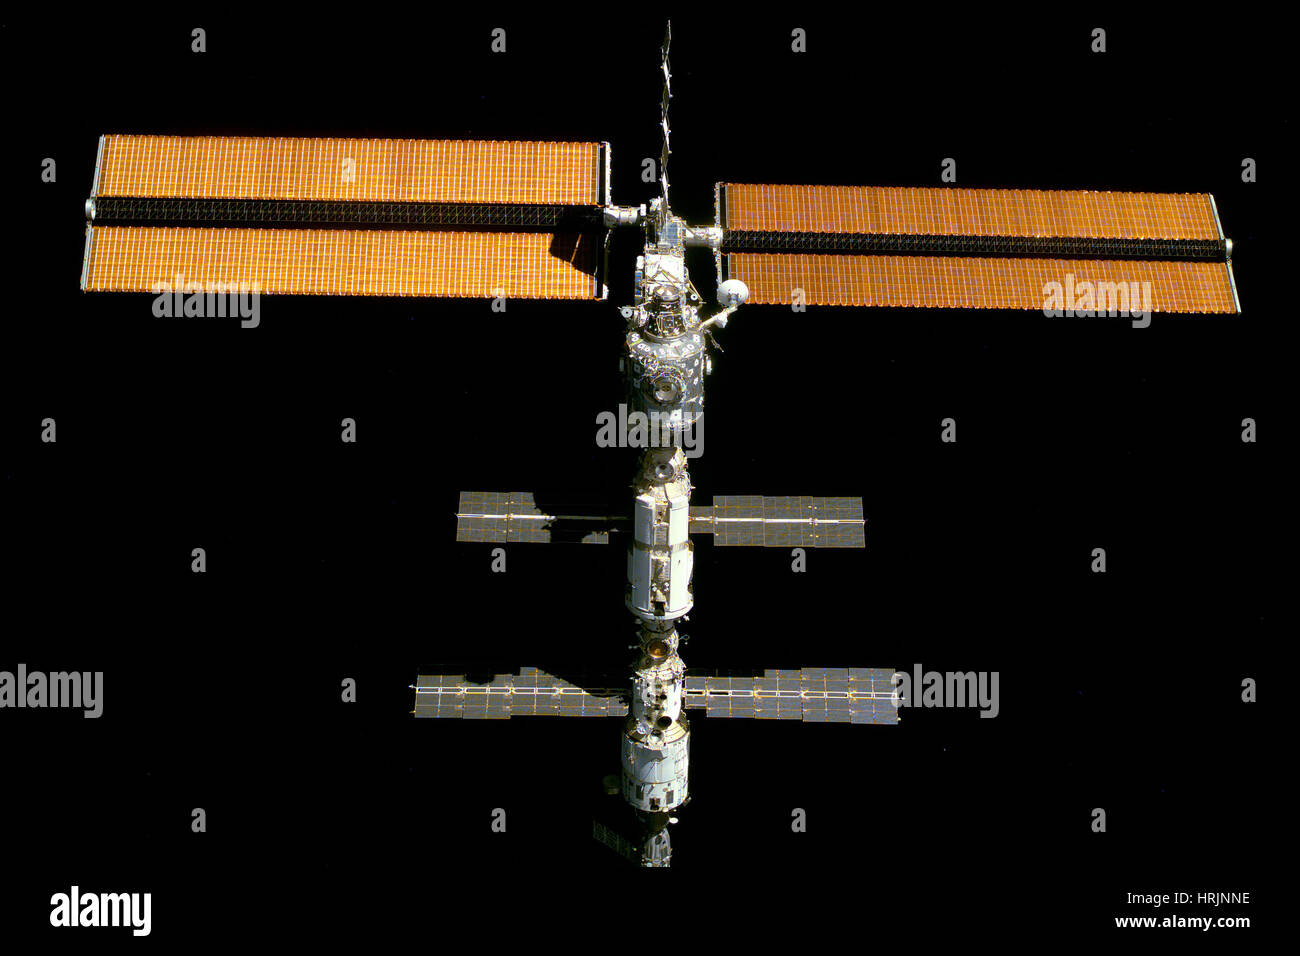 STS-97, ISS Solar Array, 2000 Stock Photo